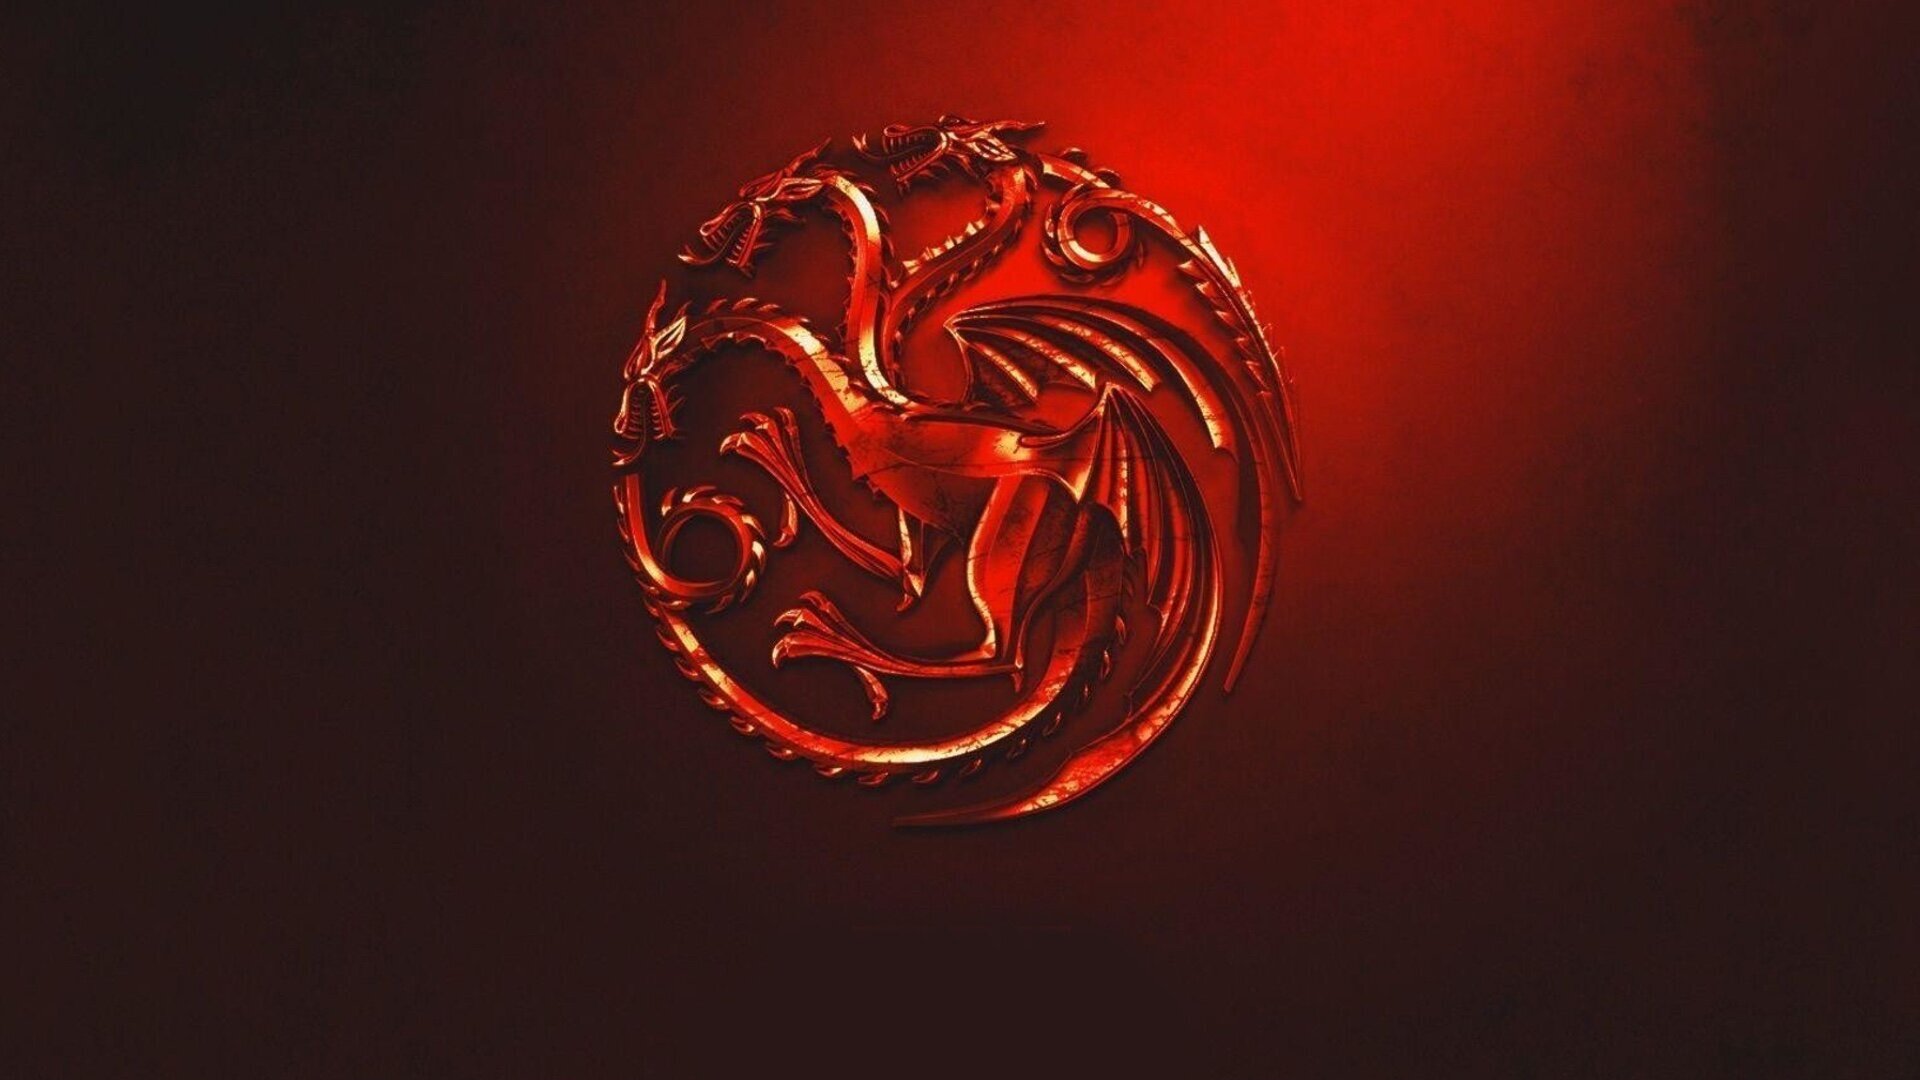 House Of The Dragon Wallpaper